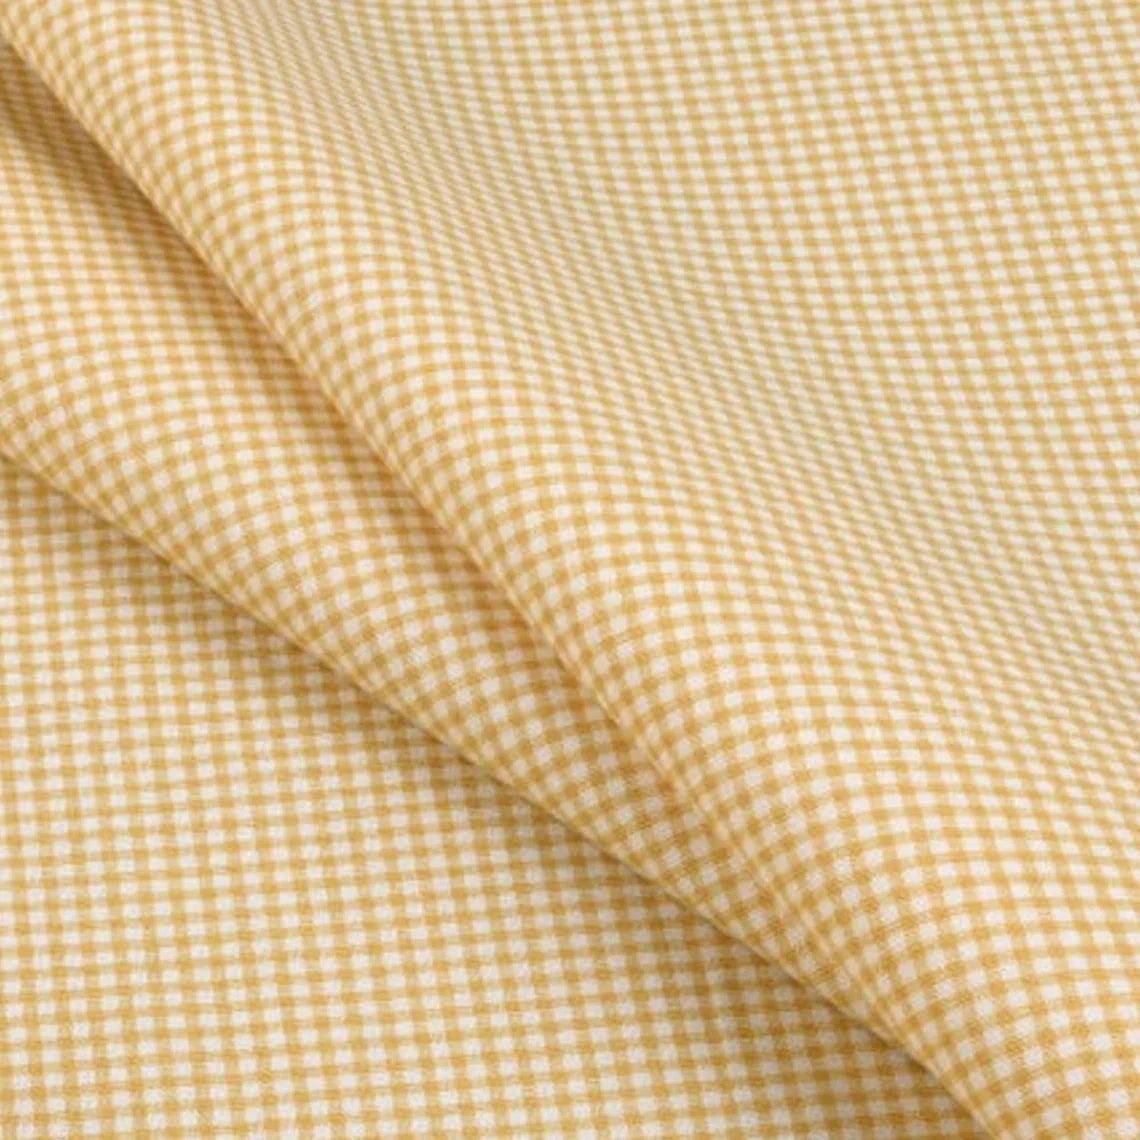 Round Tablecloth in Farmhouse Barley Yellow Gold Gingham Check